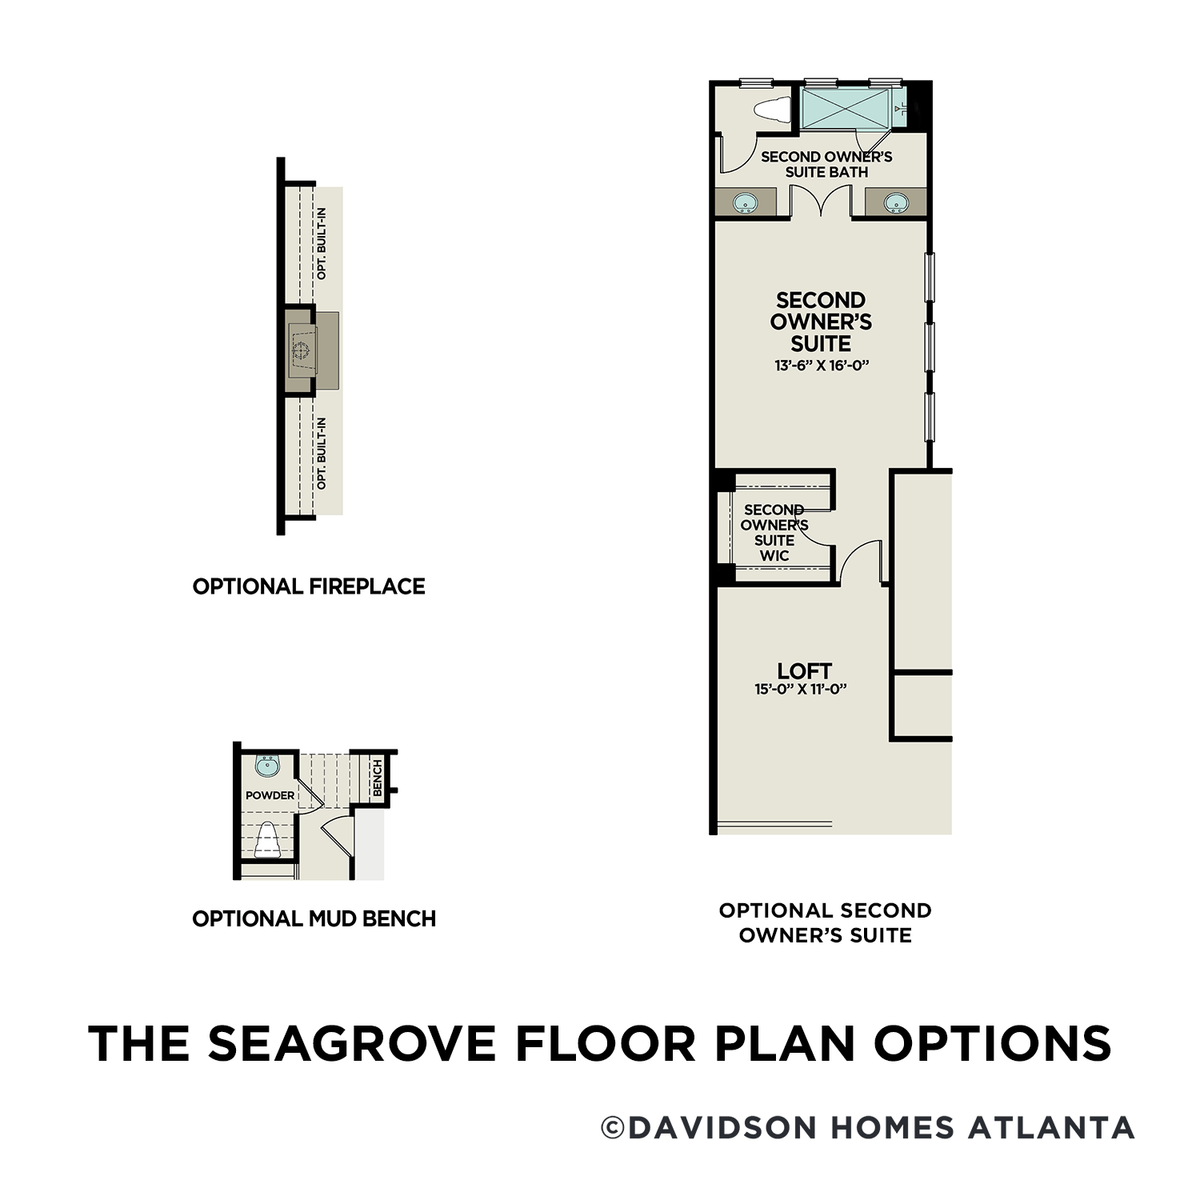 3 - The Seagrove A floor plan layout for 754 Stickley Oak Way in Davidson Homes' The Village at Towne Lake community.